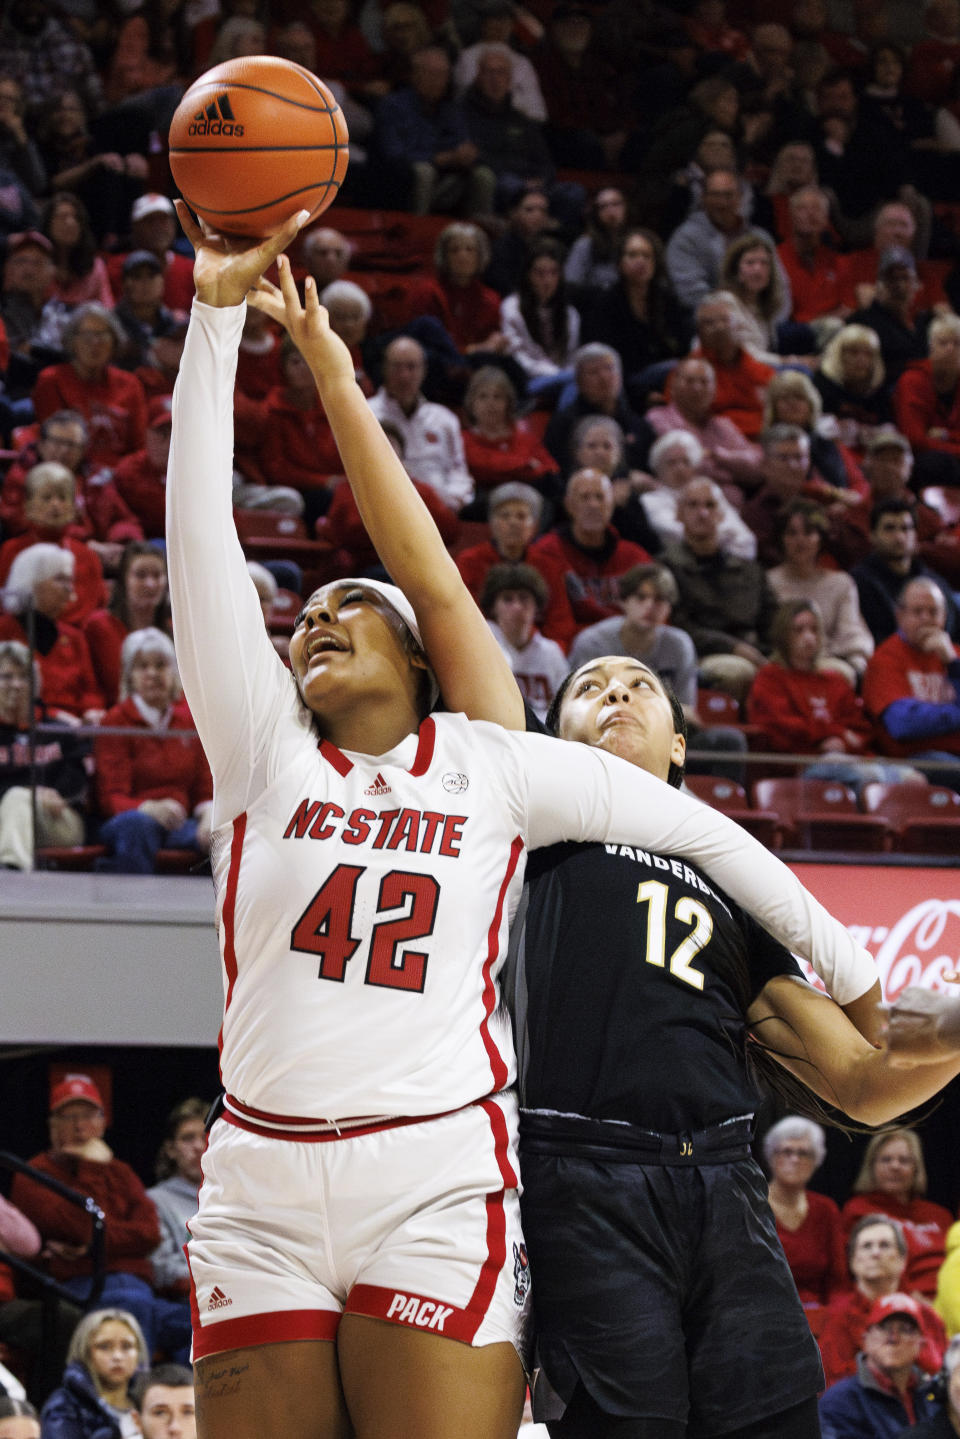 North Carolina State's Mallory Collier (42) attempts a shot as Vanderbilt's Khamil Pierre (12) defends during the first half of an NCAA college basketball game in Raleigh, N.C., Wednesday, Nov. 29, 2023. (AP Photo/Ben McKeown)